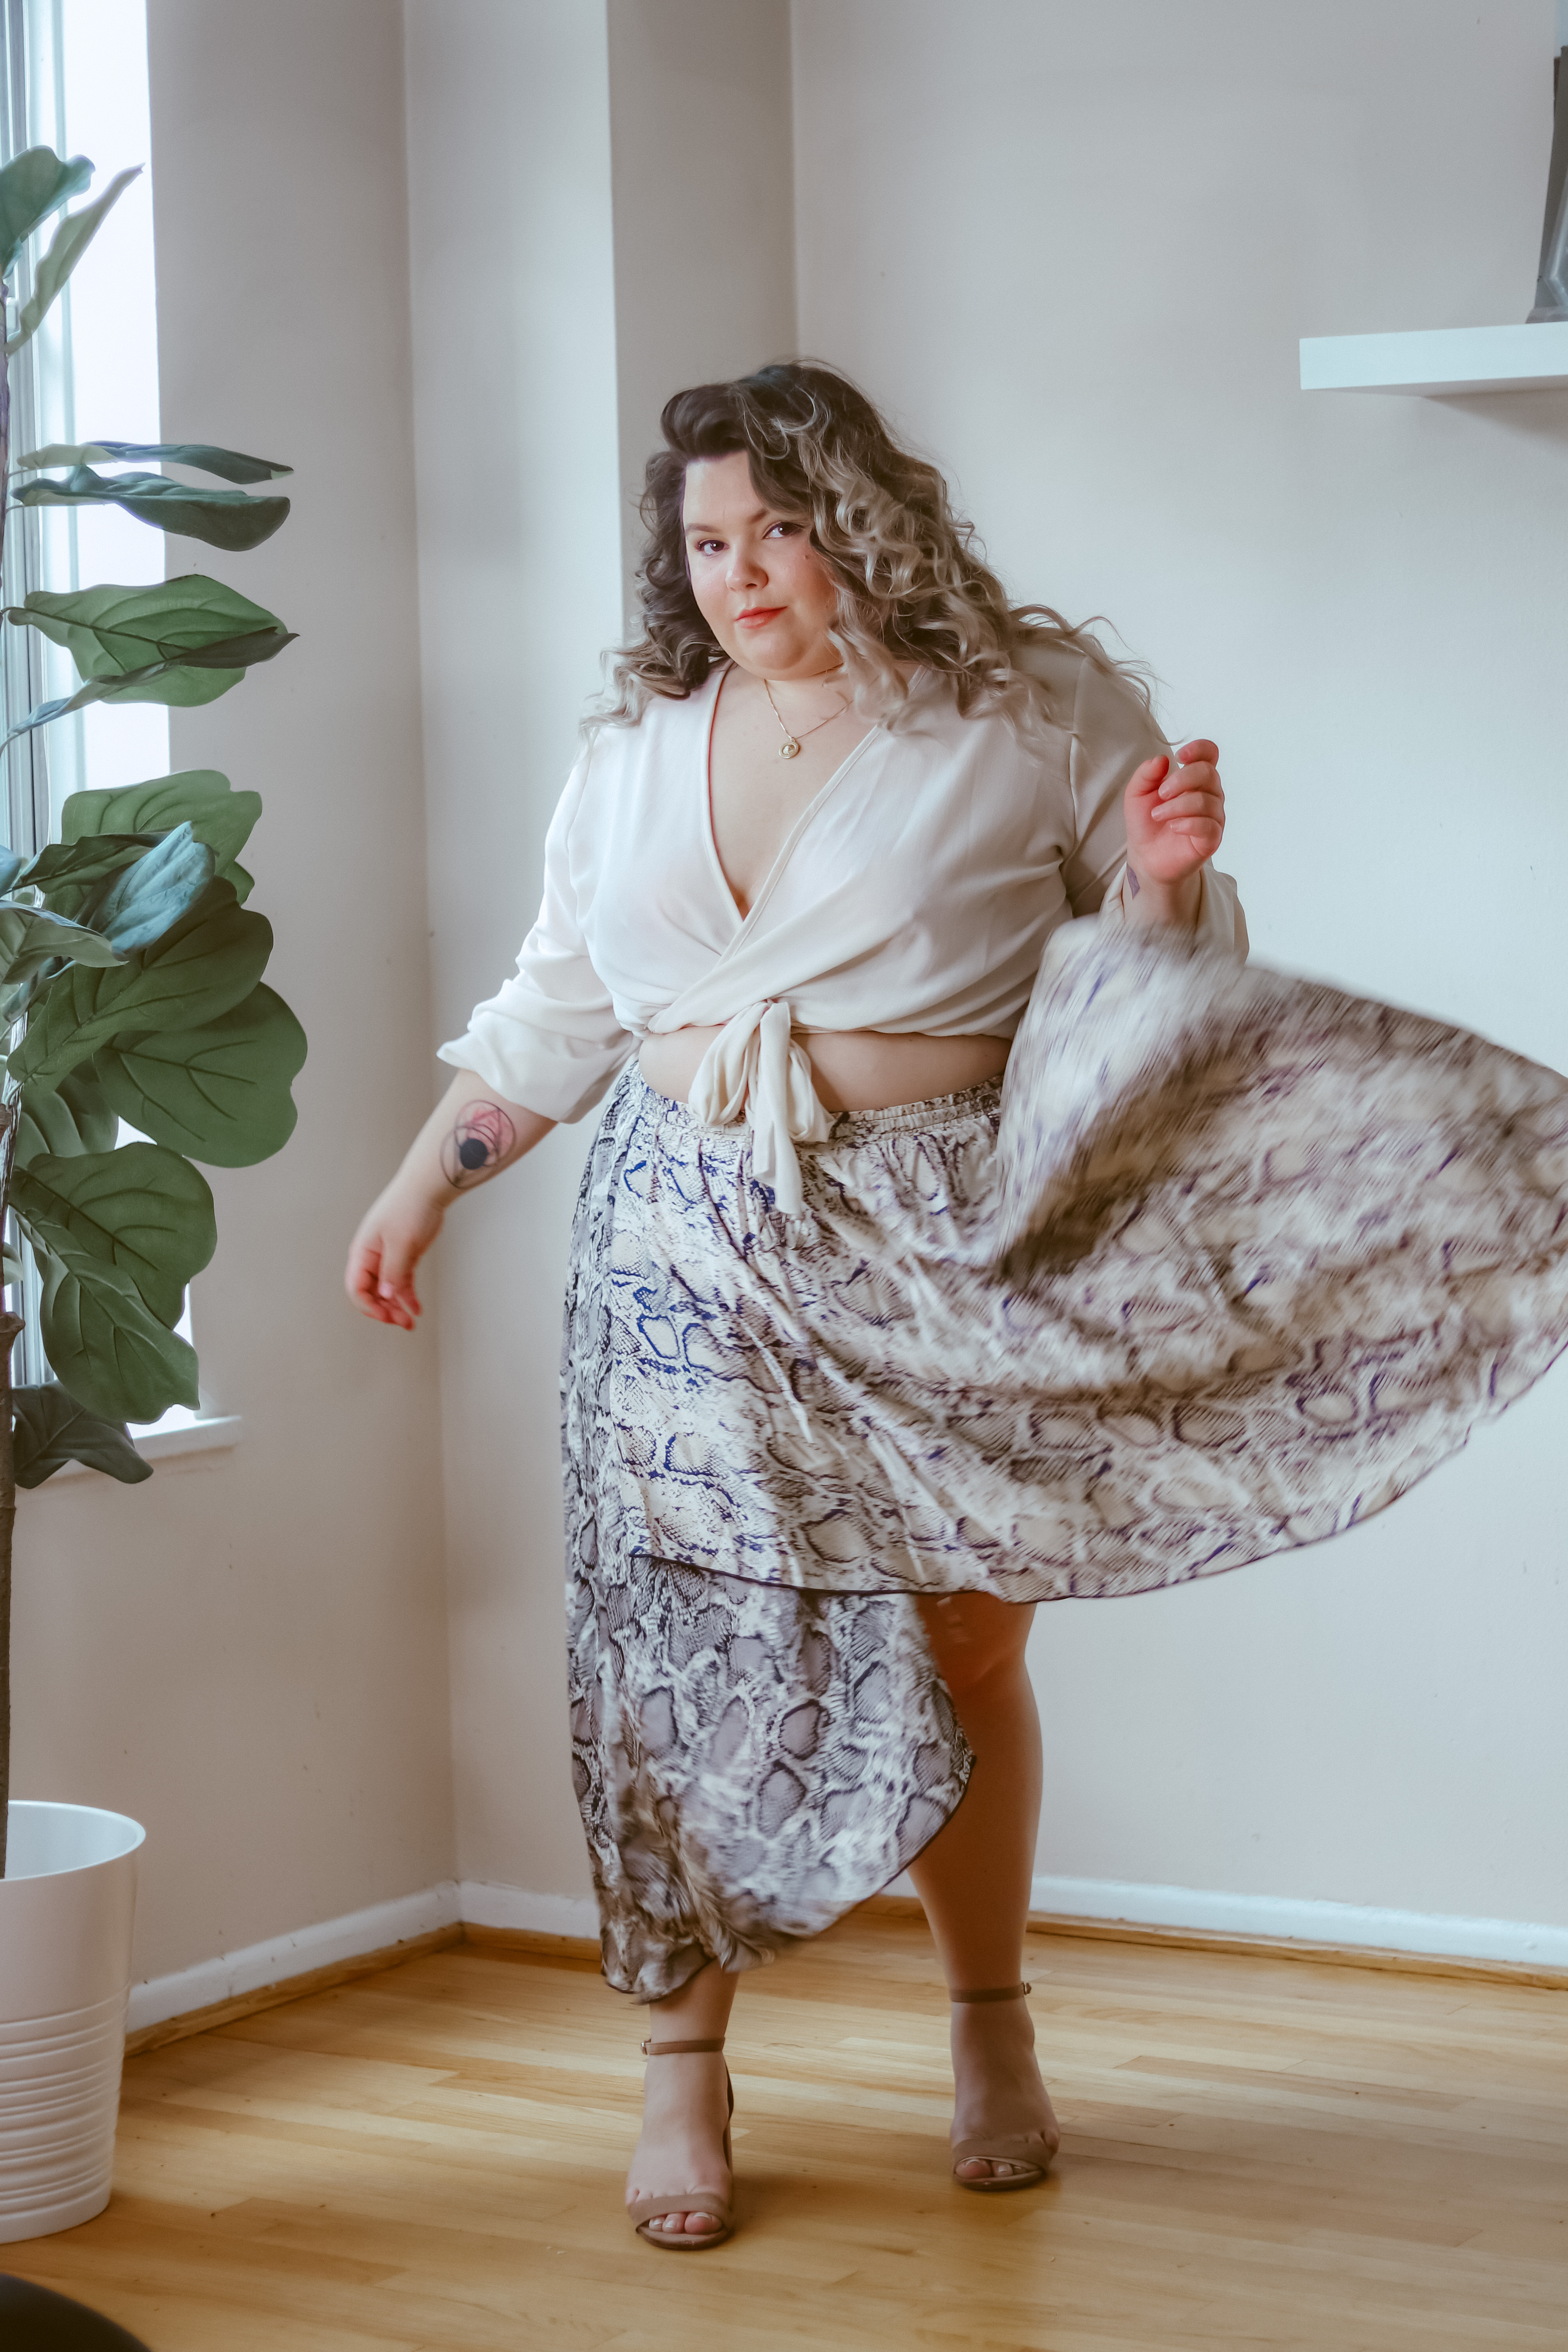 Chicago Plus Size Petite Fashion Blogger, influencer, YouTuber, and model Natalie Craig, of Natalie in the City, styles a snakeskin midi skirt.